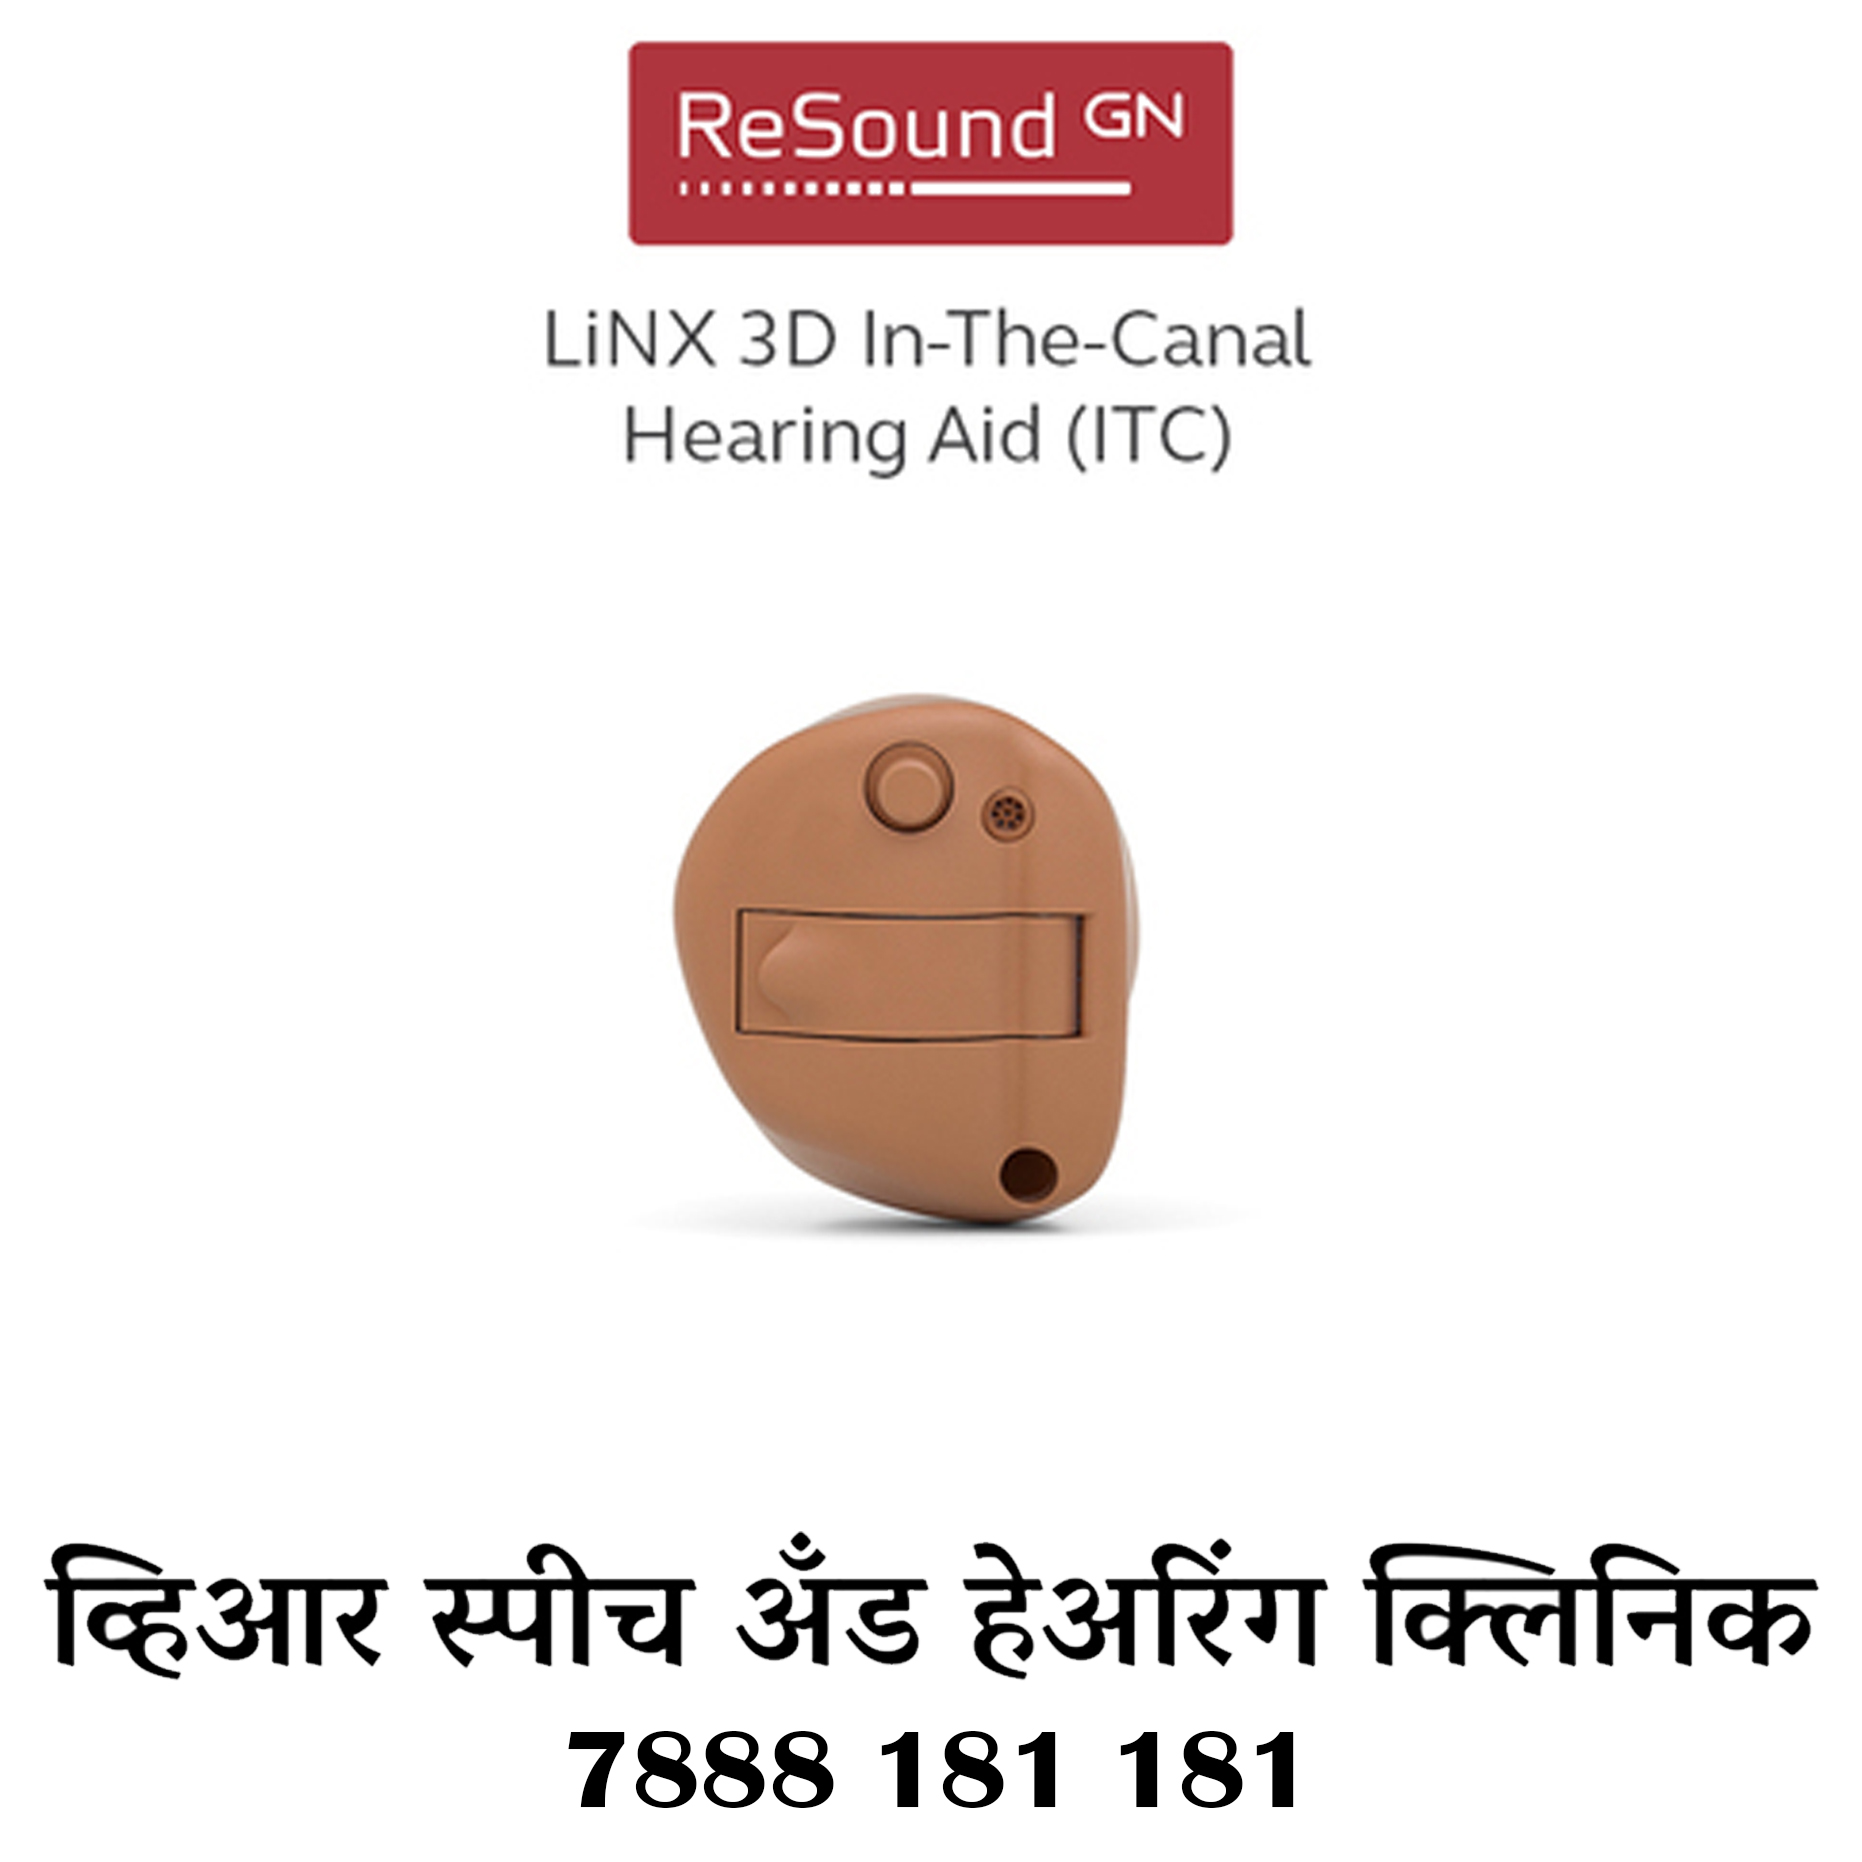 ReSound LiNX 3D is our advanced digital hearing aid. With ReSound LiNX 3D you’ll be better at identifying speech in noise and be able to hear more sounds around you. You can use your hearing aids like wireless headphones and you’ll get a brand new dimension of control over your hearing aids – wherever you are.